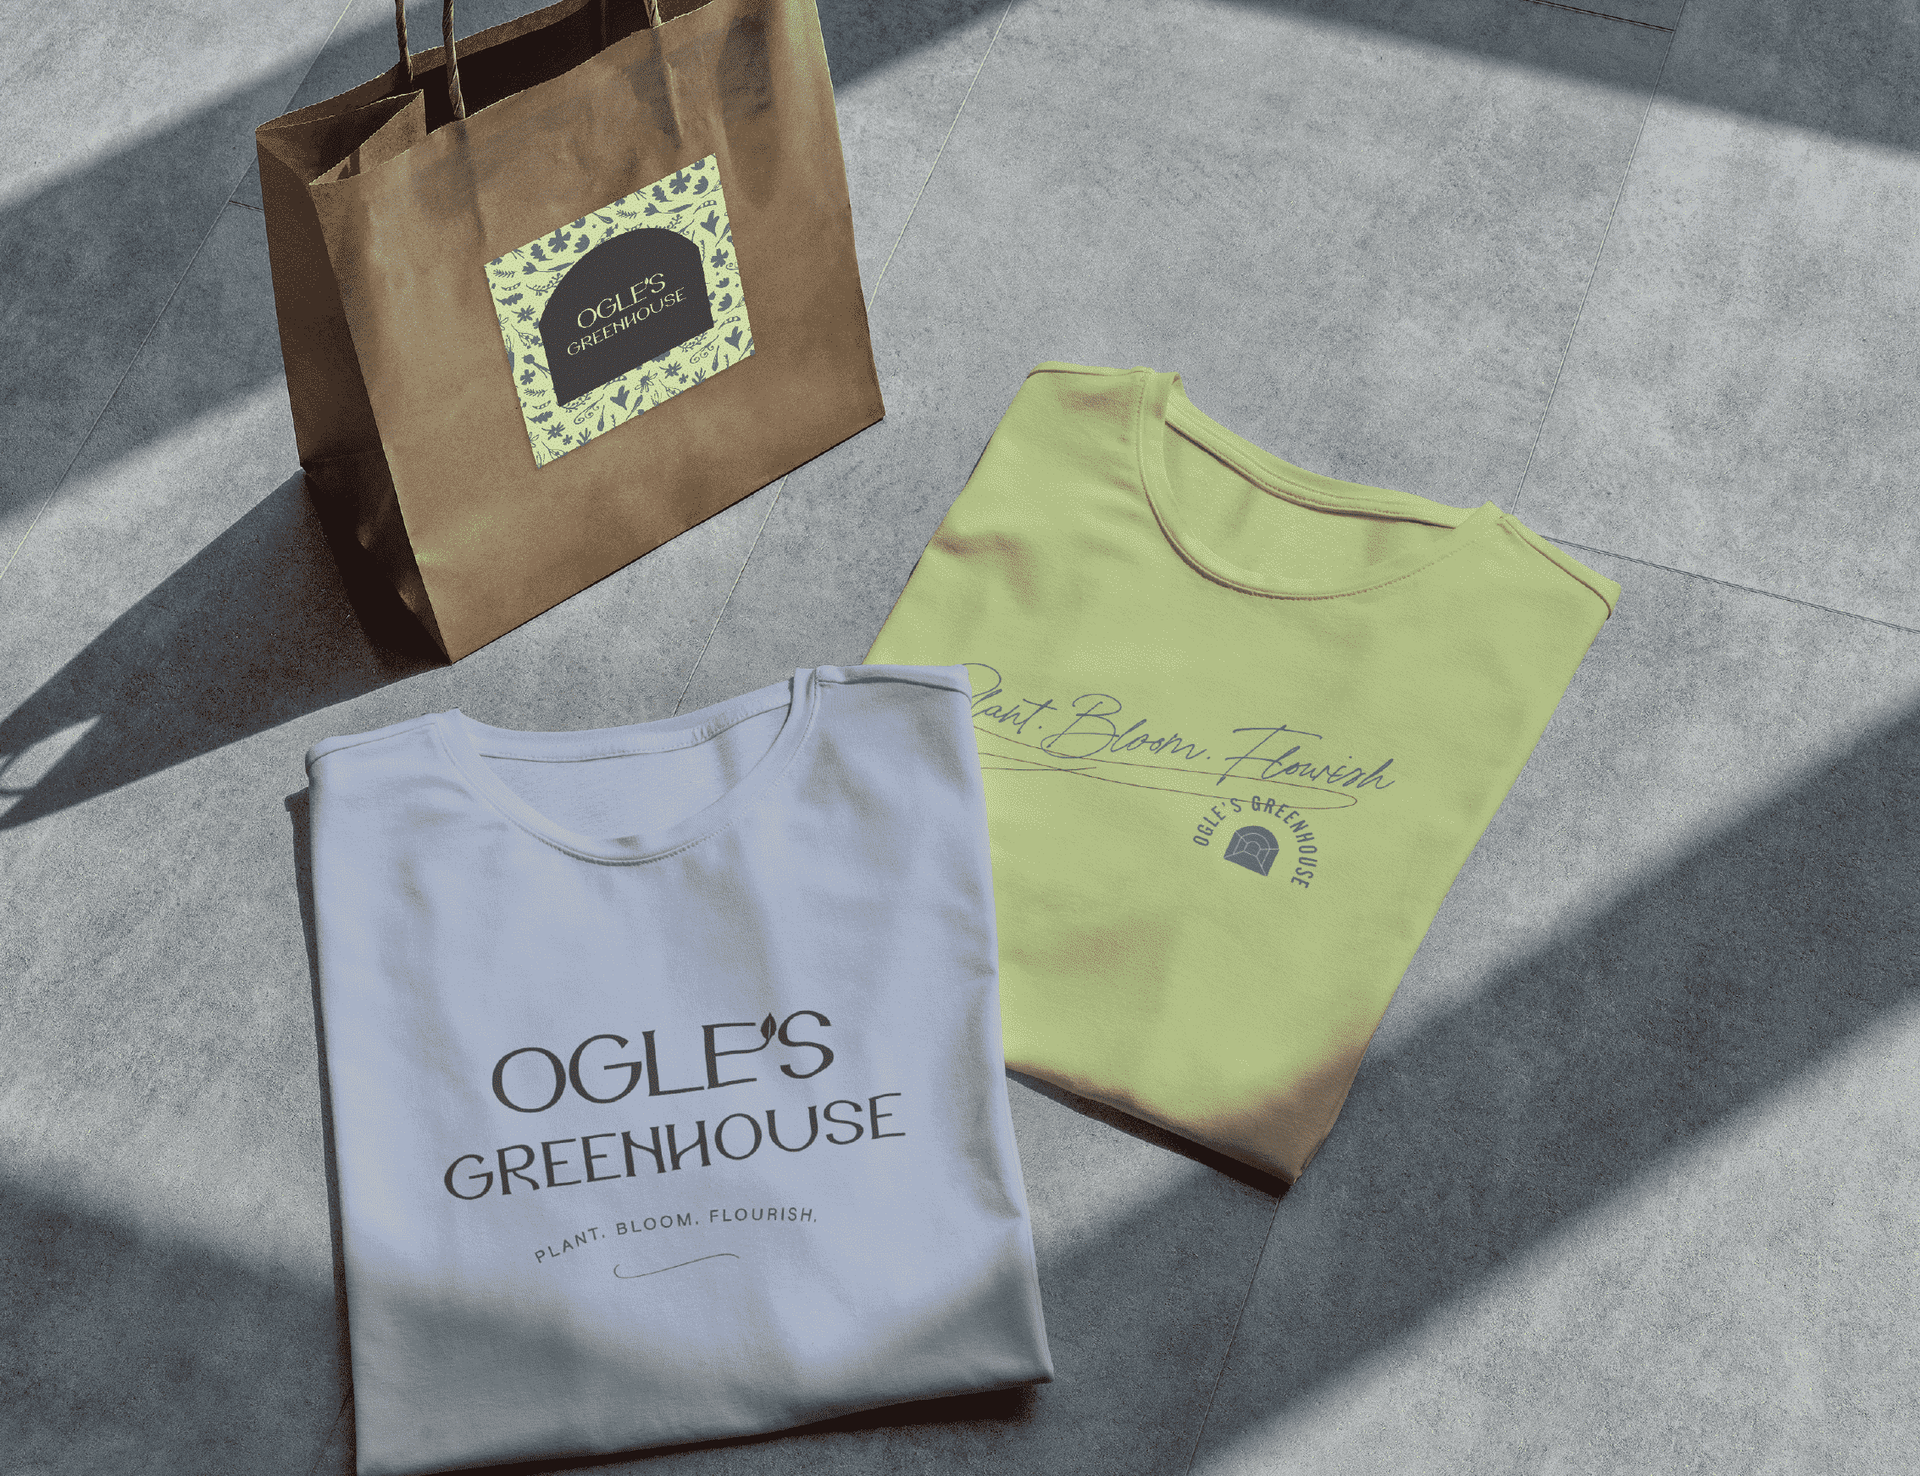 A t-shirt that says ogle 's greenhouse on it